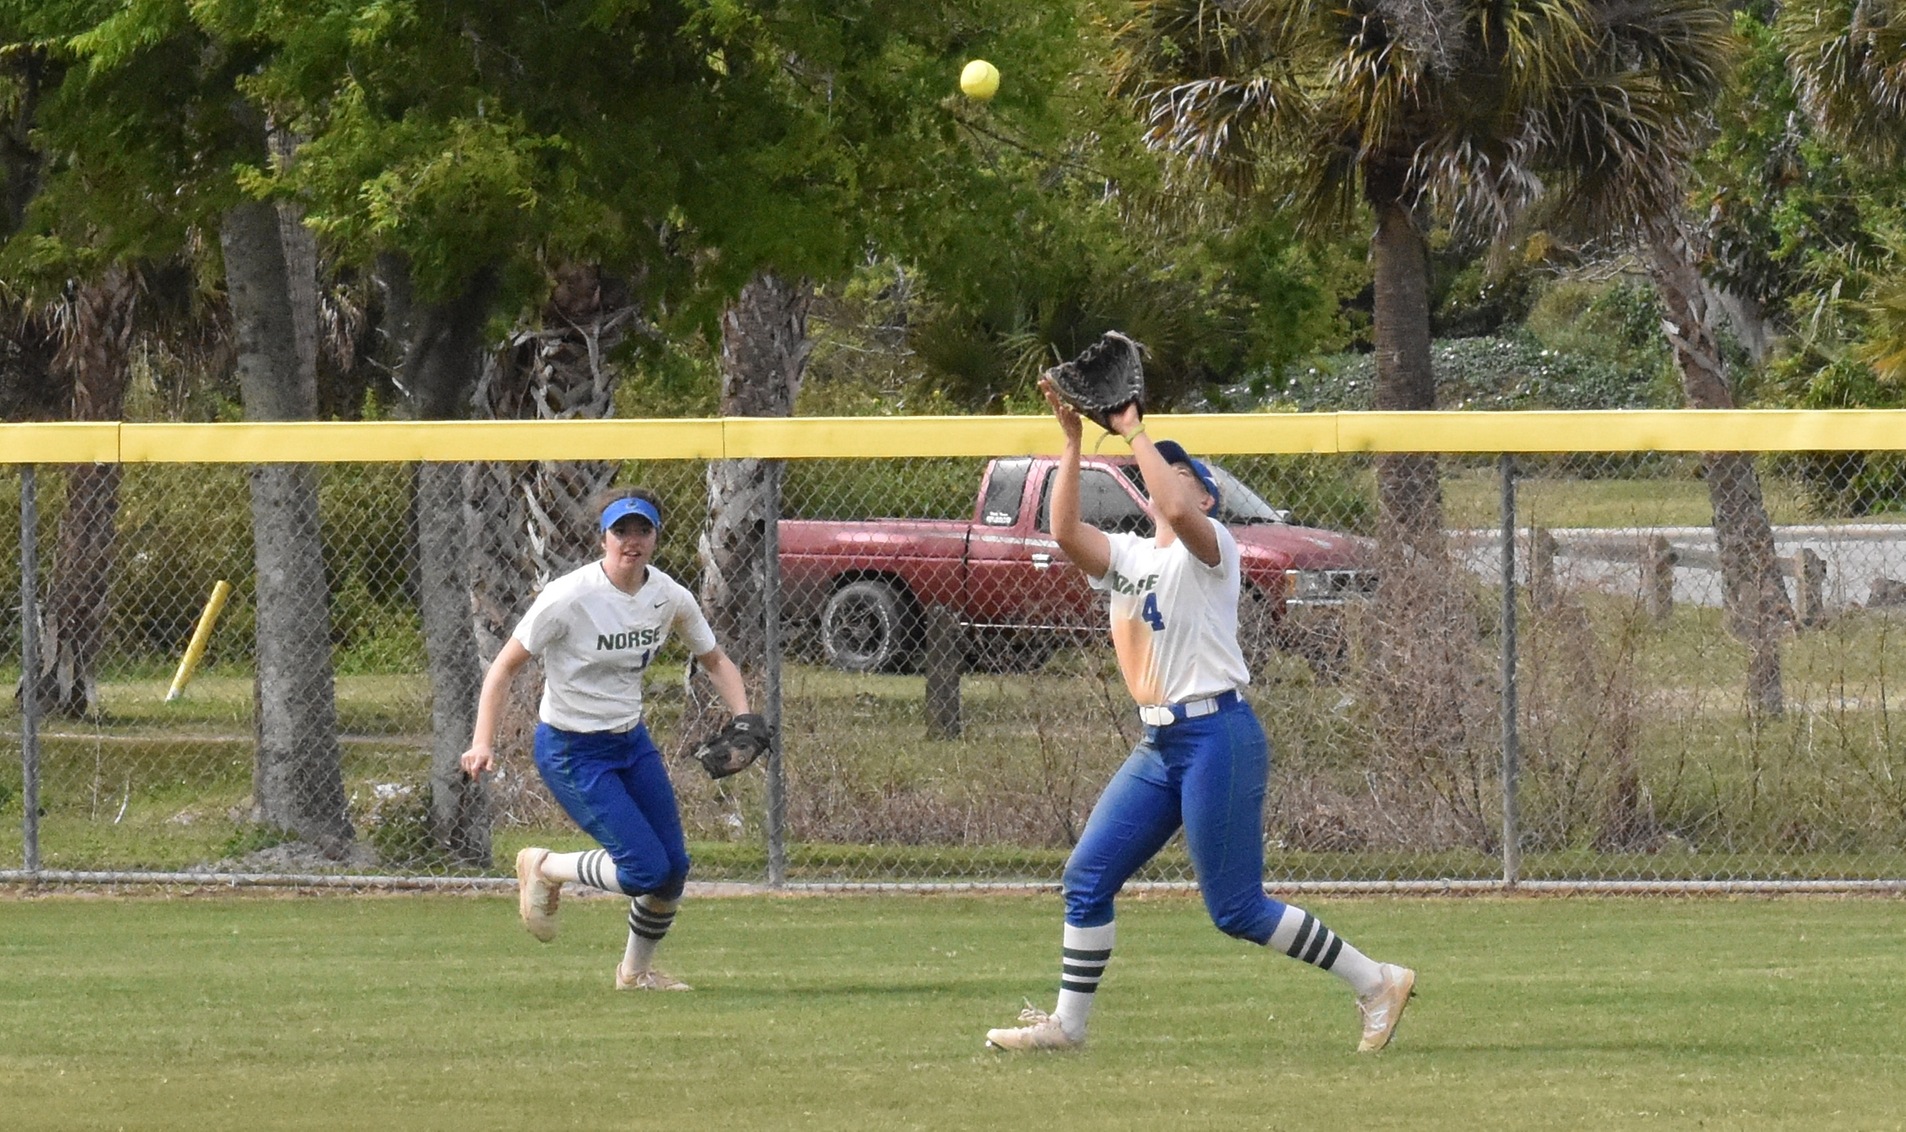 Lexi Chaillier lines up to catch a fly ball in the outfield as Kaitlyn Hardwick looks on